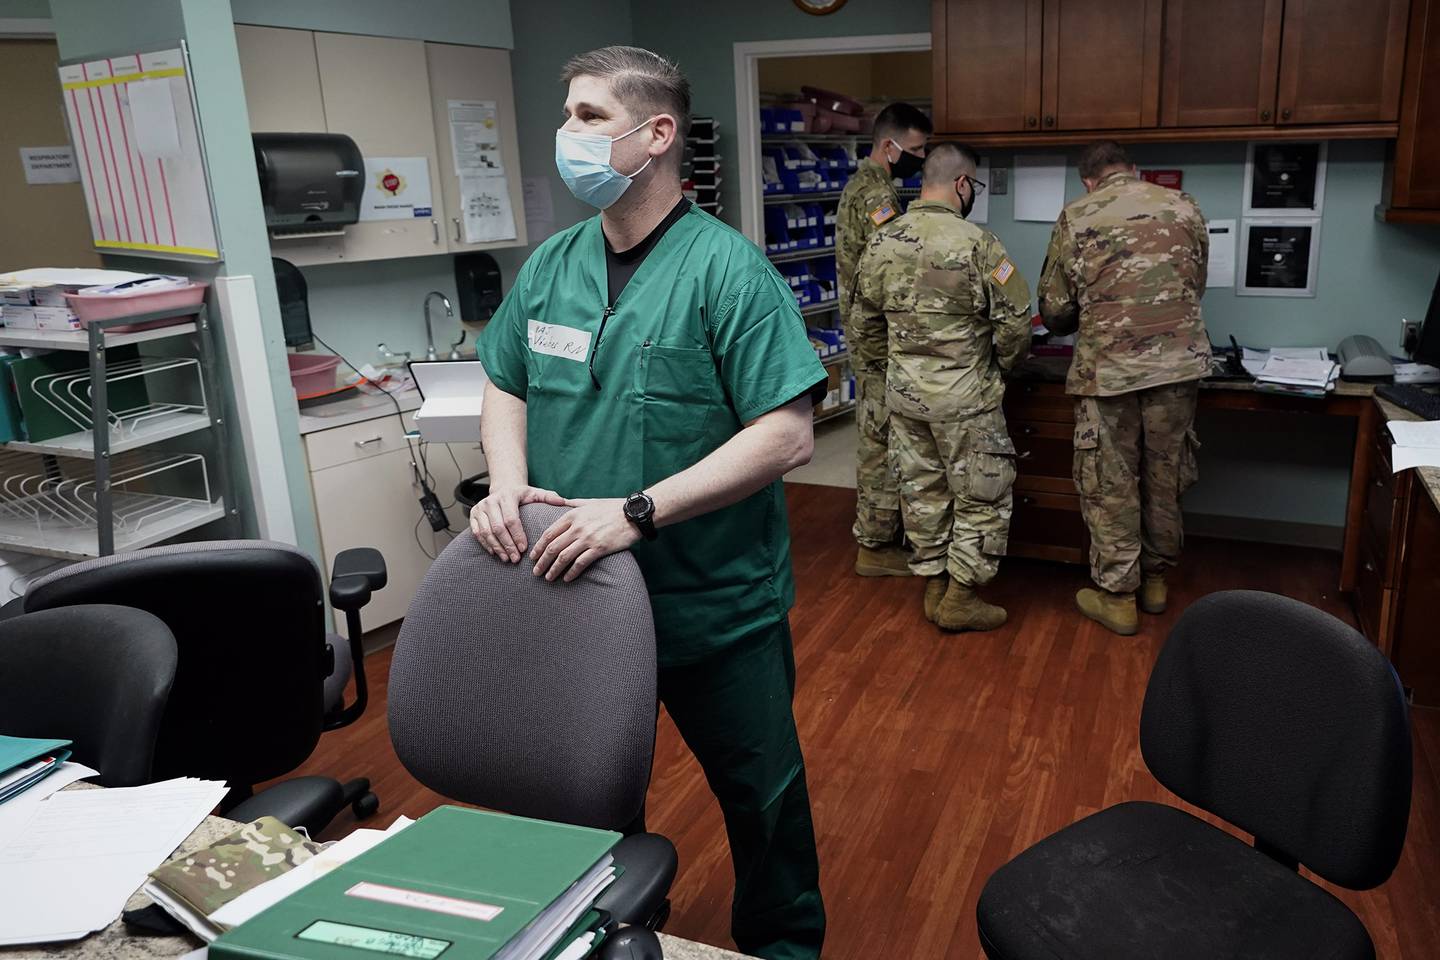 Registered nurse Army Maj. Andrew Wieher, with the Urban Augmentation Medical Task Force, stands at a nurses station inside a wing at United Memorial Medical Center, Thursday, July 16, 2020, in Houston.